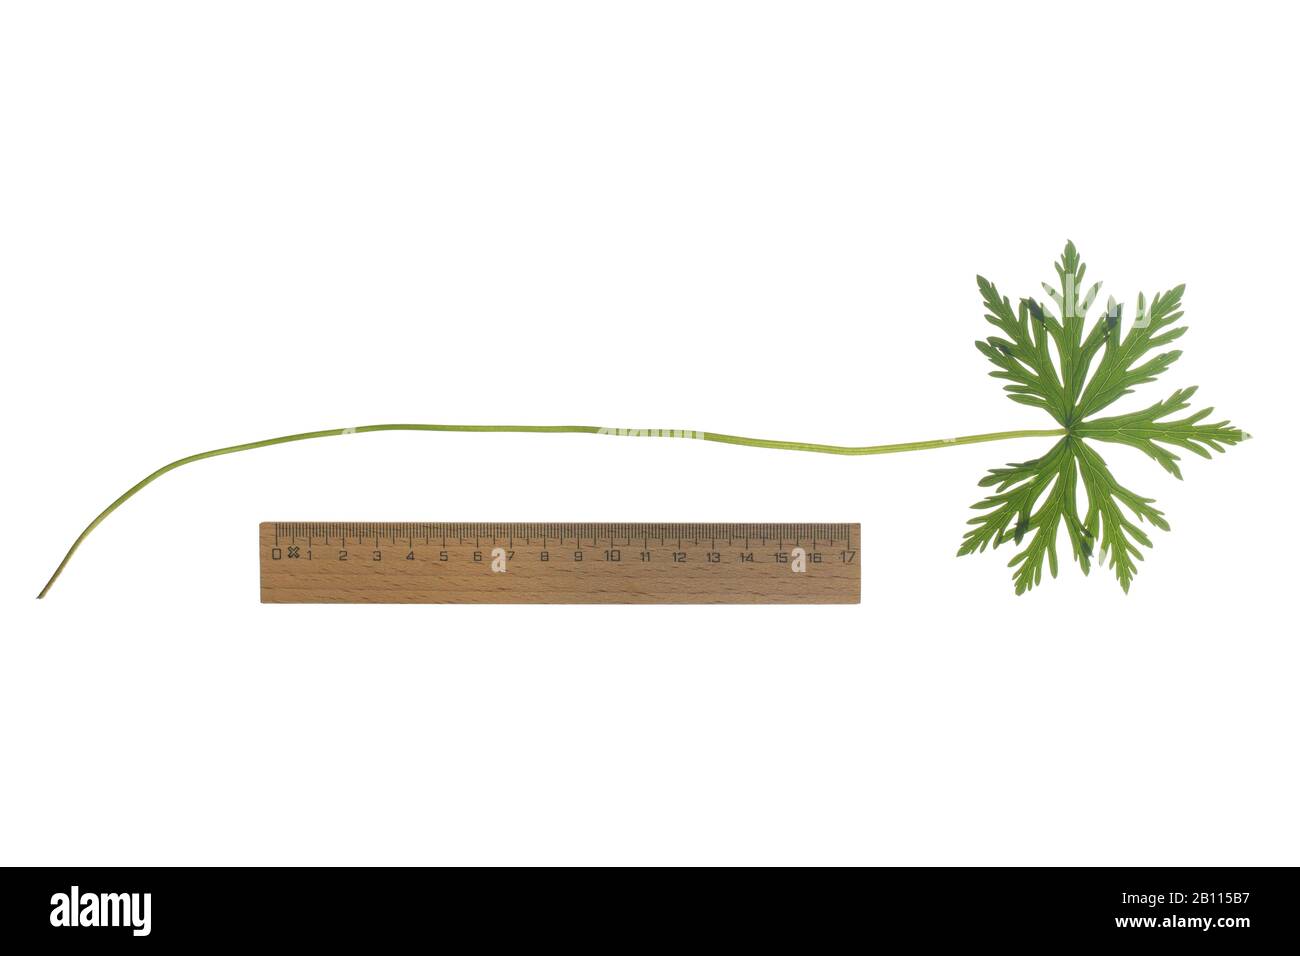 meadow cranesbill (Geranium pratense), leaf, cutout with ruler, Germany Stock Photo